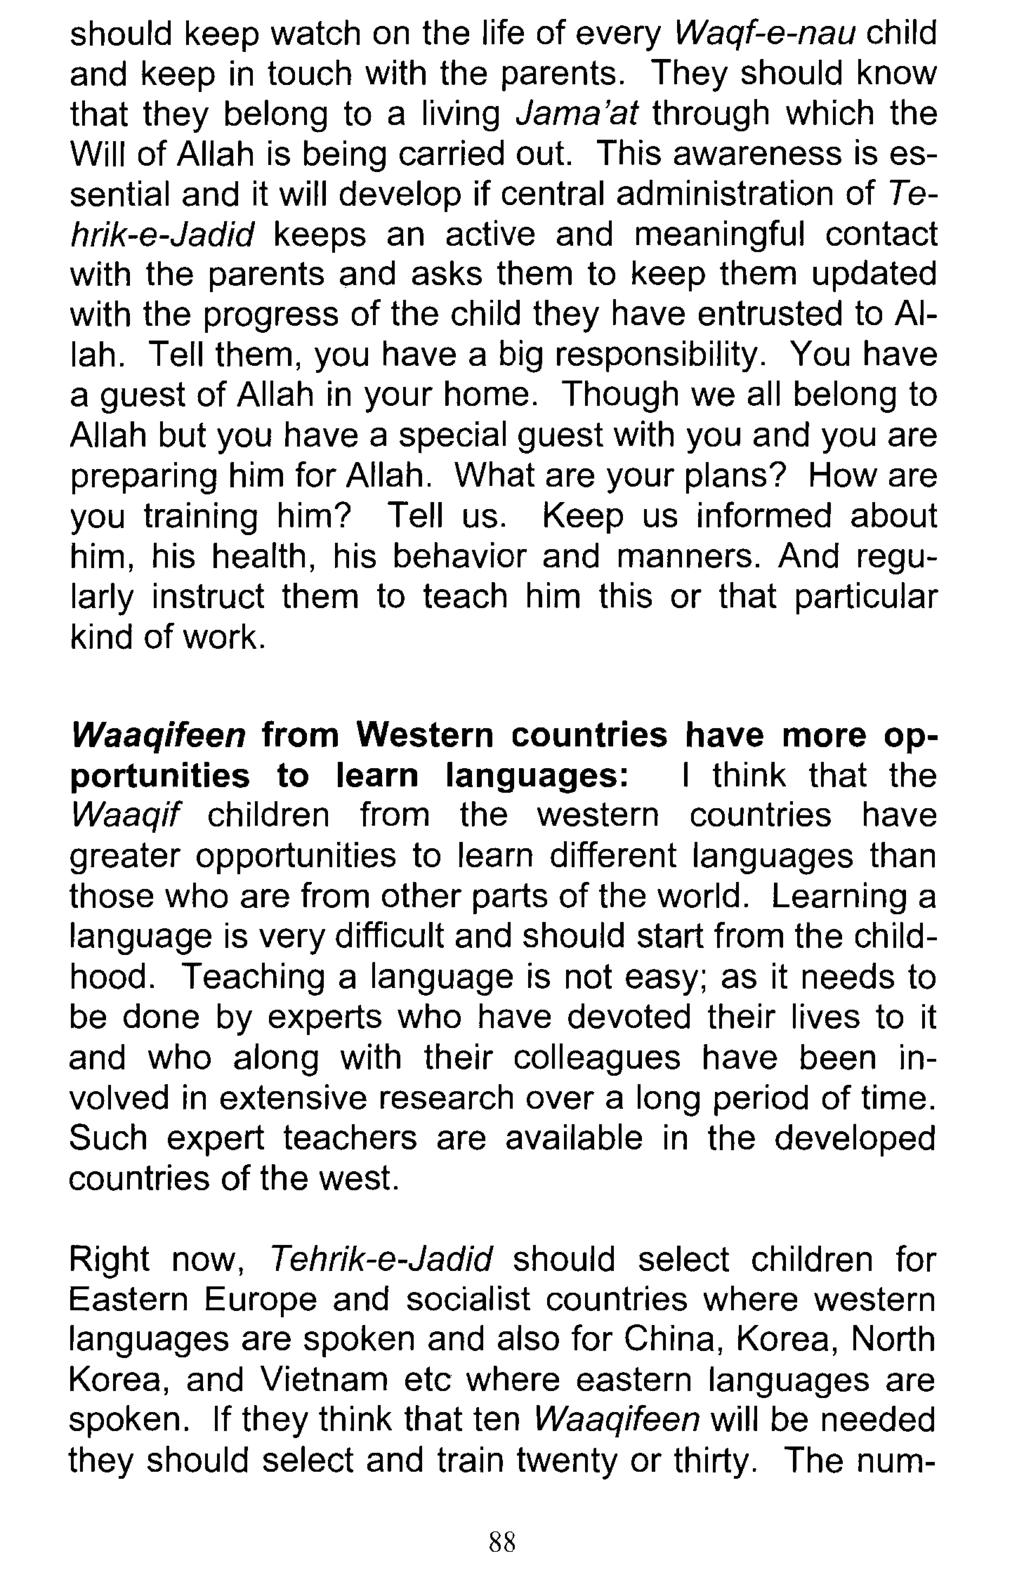 should keep watch on the life of every Waqf-e-nau child and keep in touch with the parents. They should know that they belong to a living Jama'at through which the Will of Allah is being carried out.